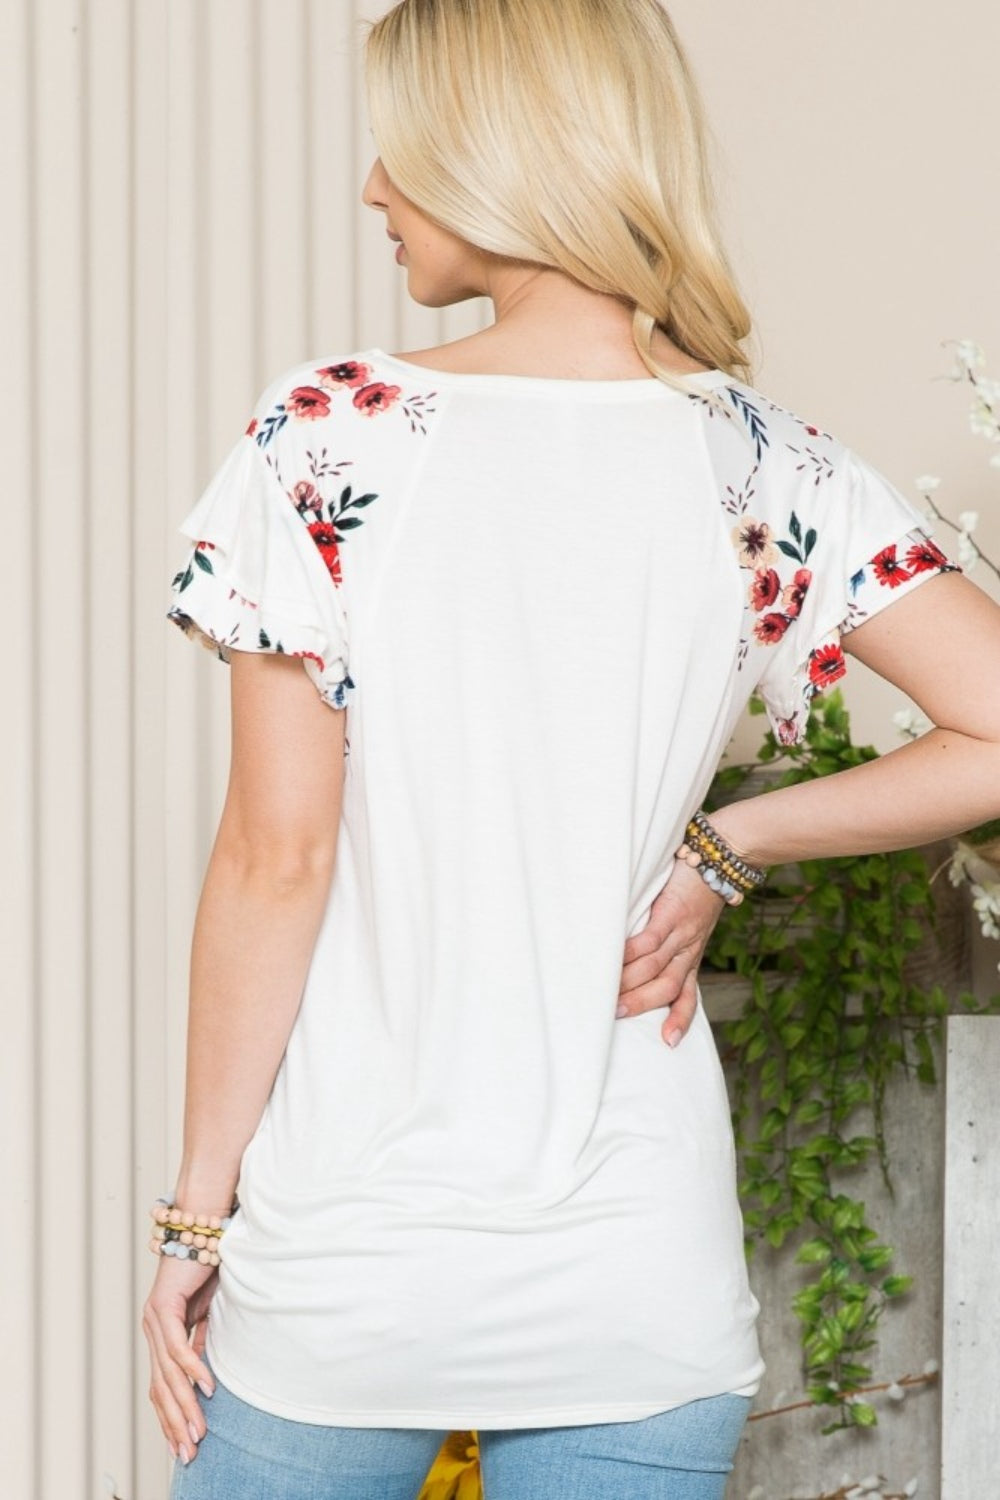 Floral Contrast Short Sleeve Top *3 colors*